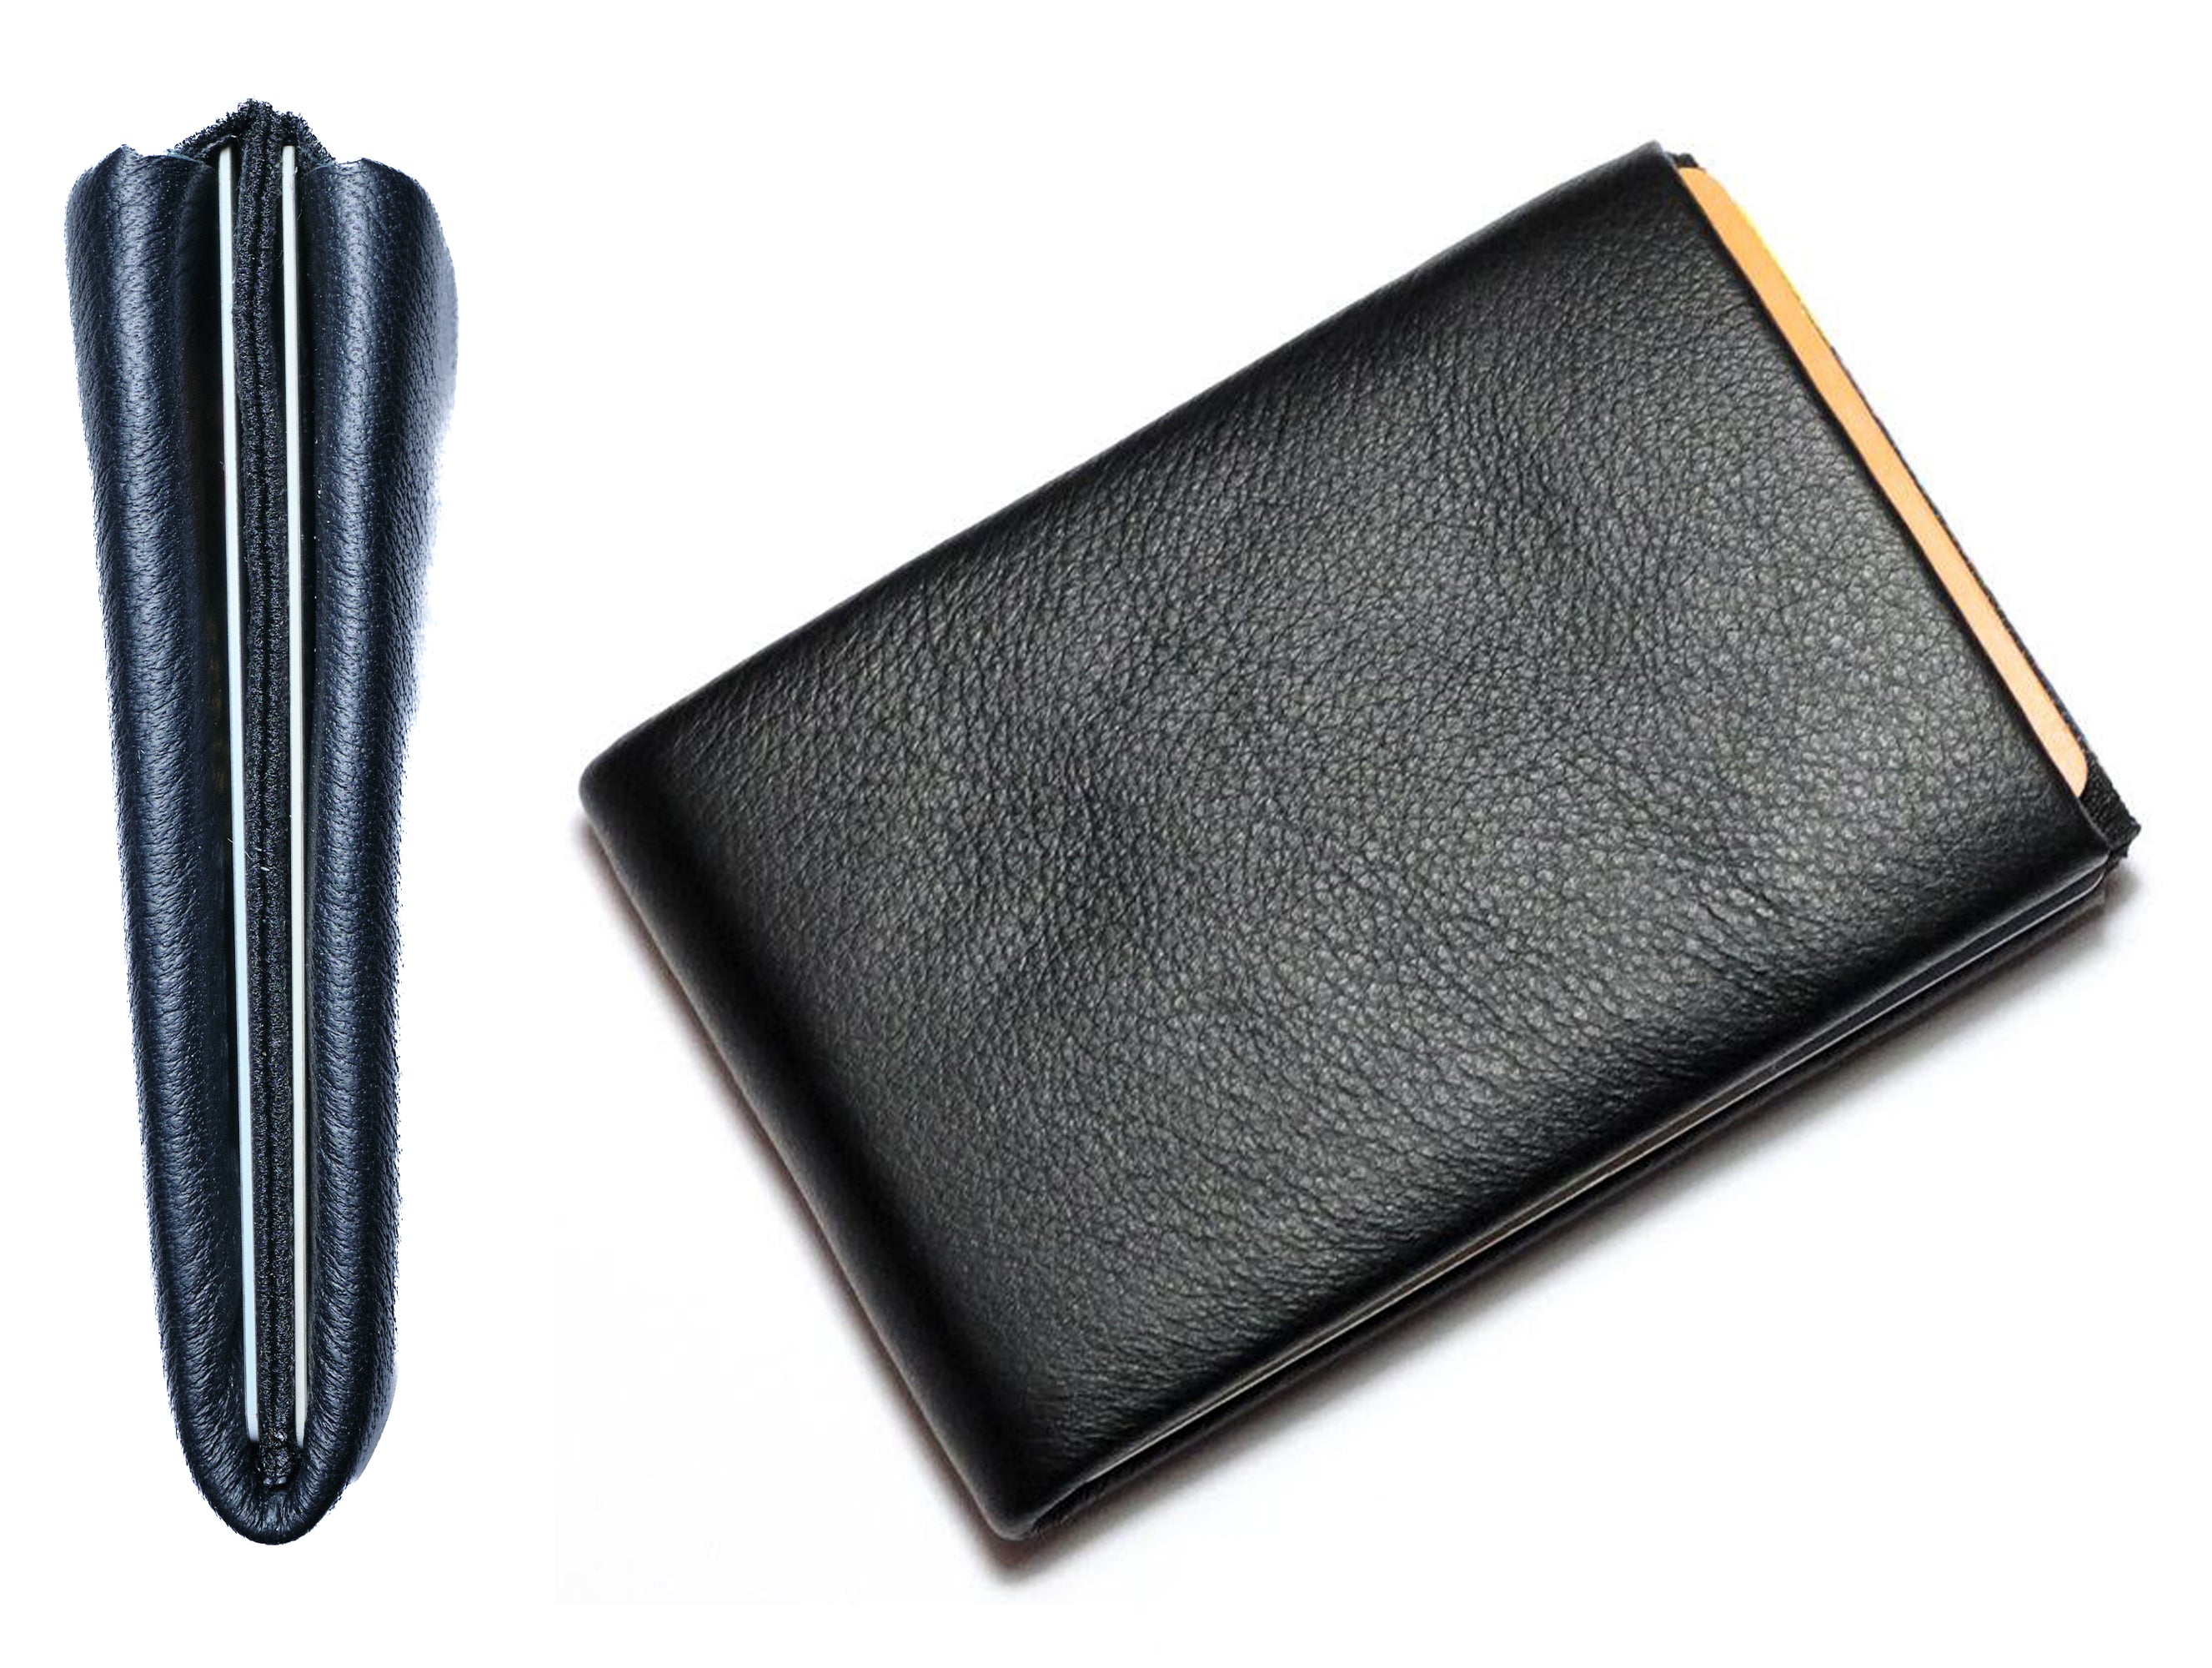 Why are Minimalist Wallets Popular?